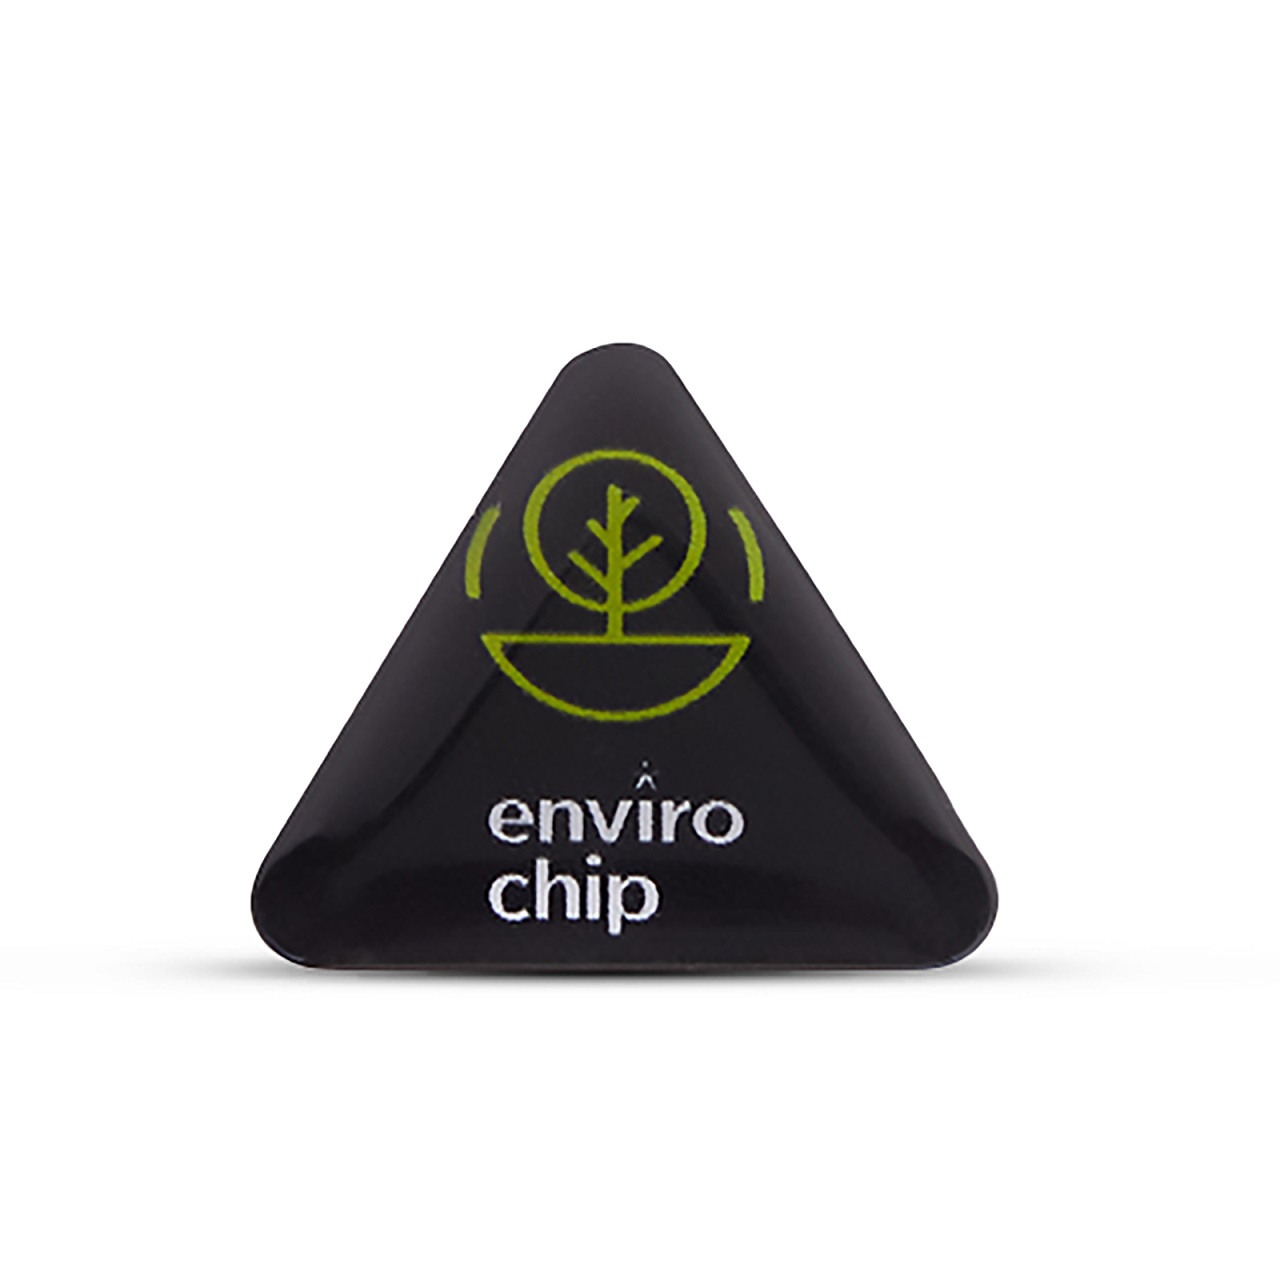 envirochip-clinically-tested-patented-anti-radiation-chip-for-mobile-phone-elements-design-earth-black